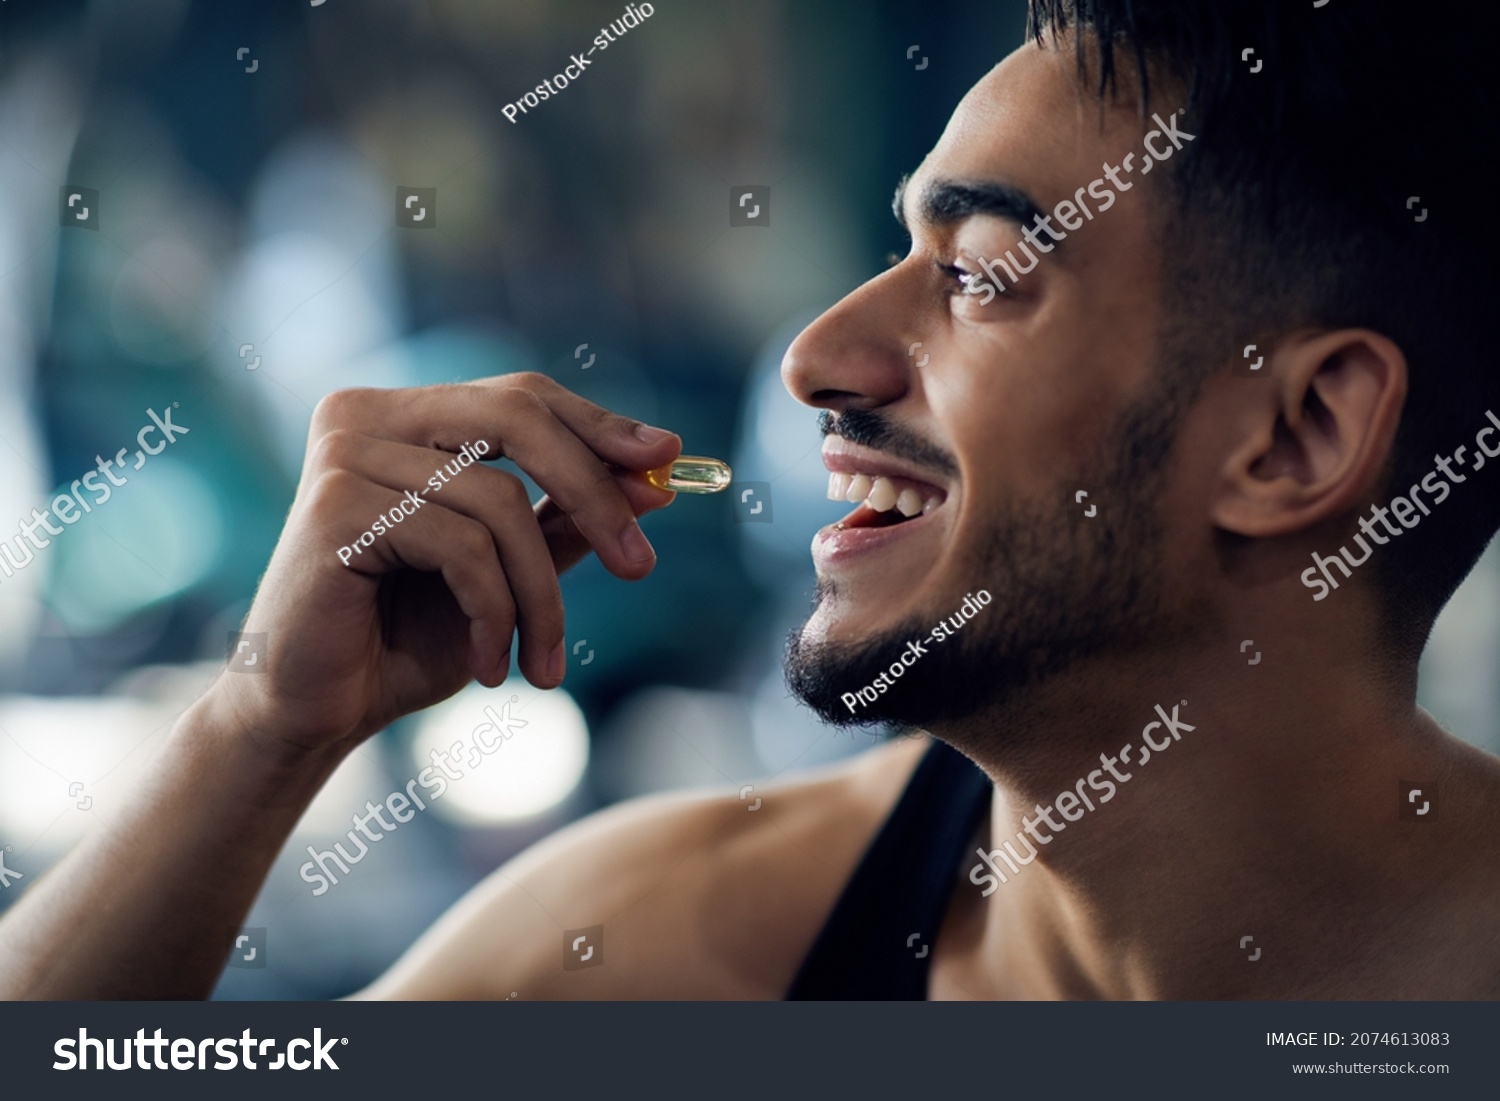 Portrait Of Happy Sportive Arab Man Taking Supplement Capsule, Closeup Shot Of Young Middle Eastern Guy Eating Omega 3 Or Amino Acid Multivitamin Pill, Enjoying Fitness Nutrition, Cropped #2074613083